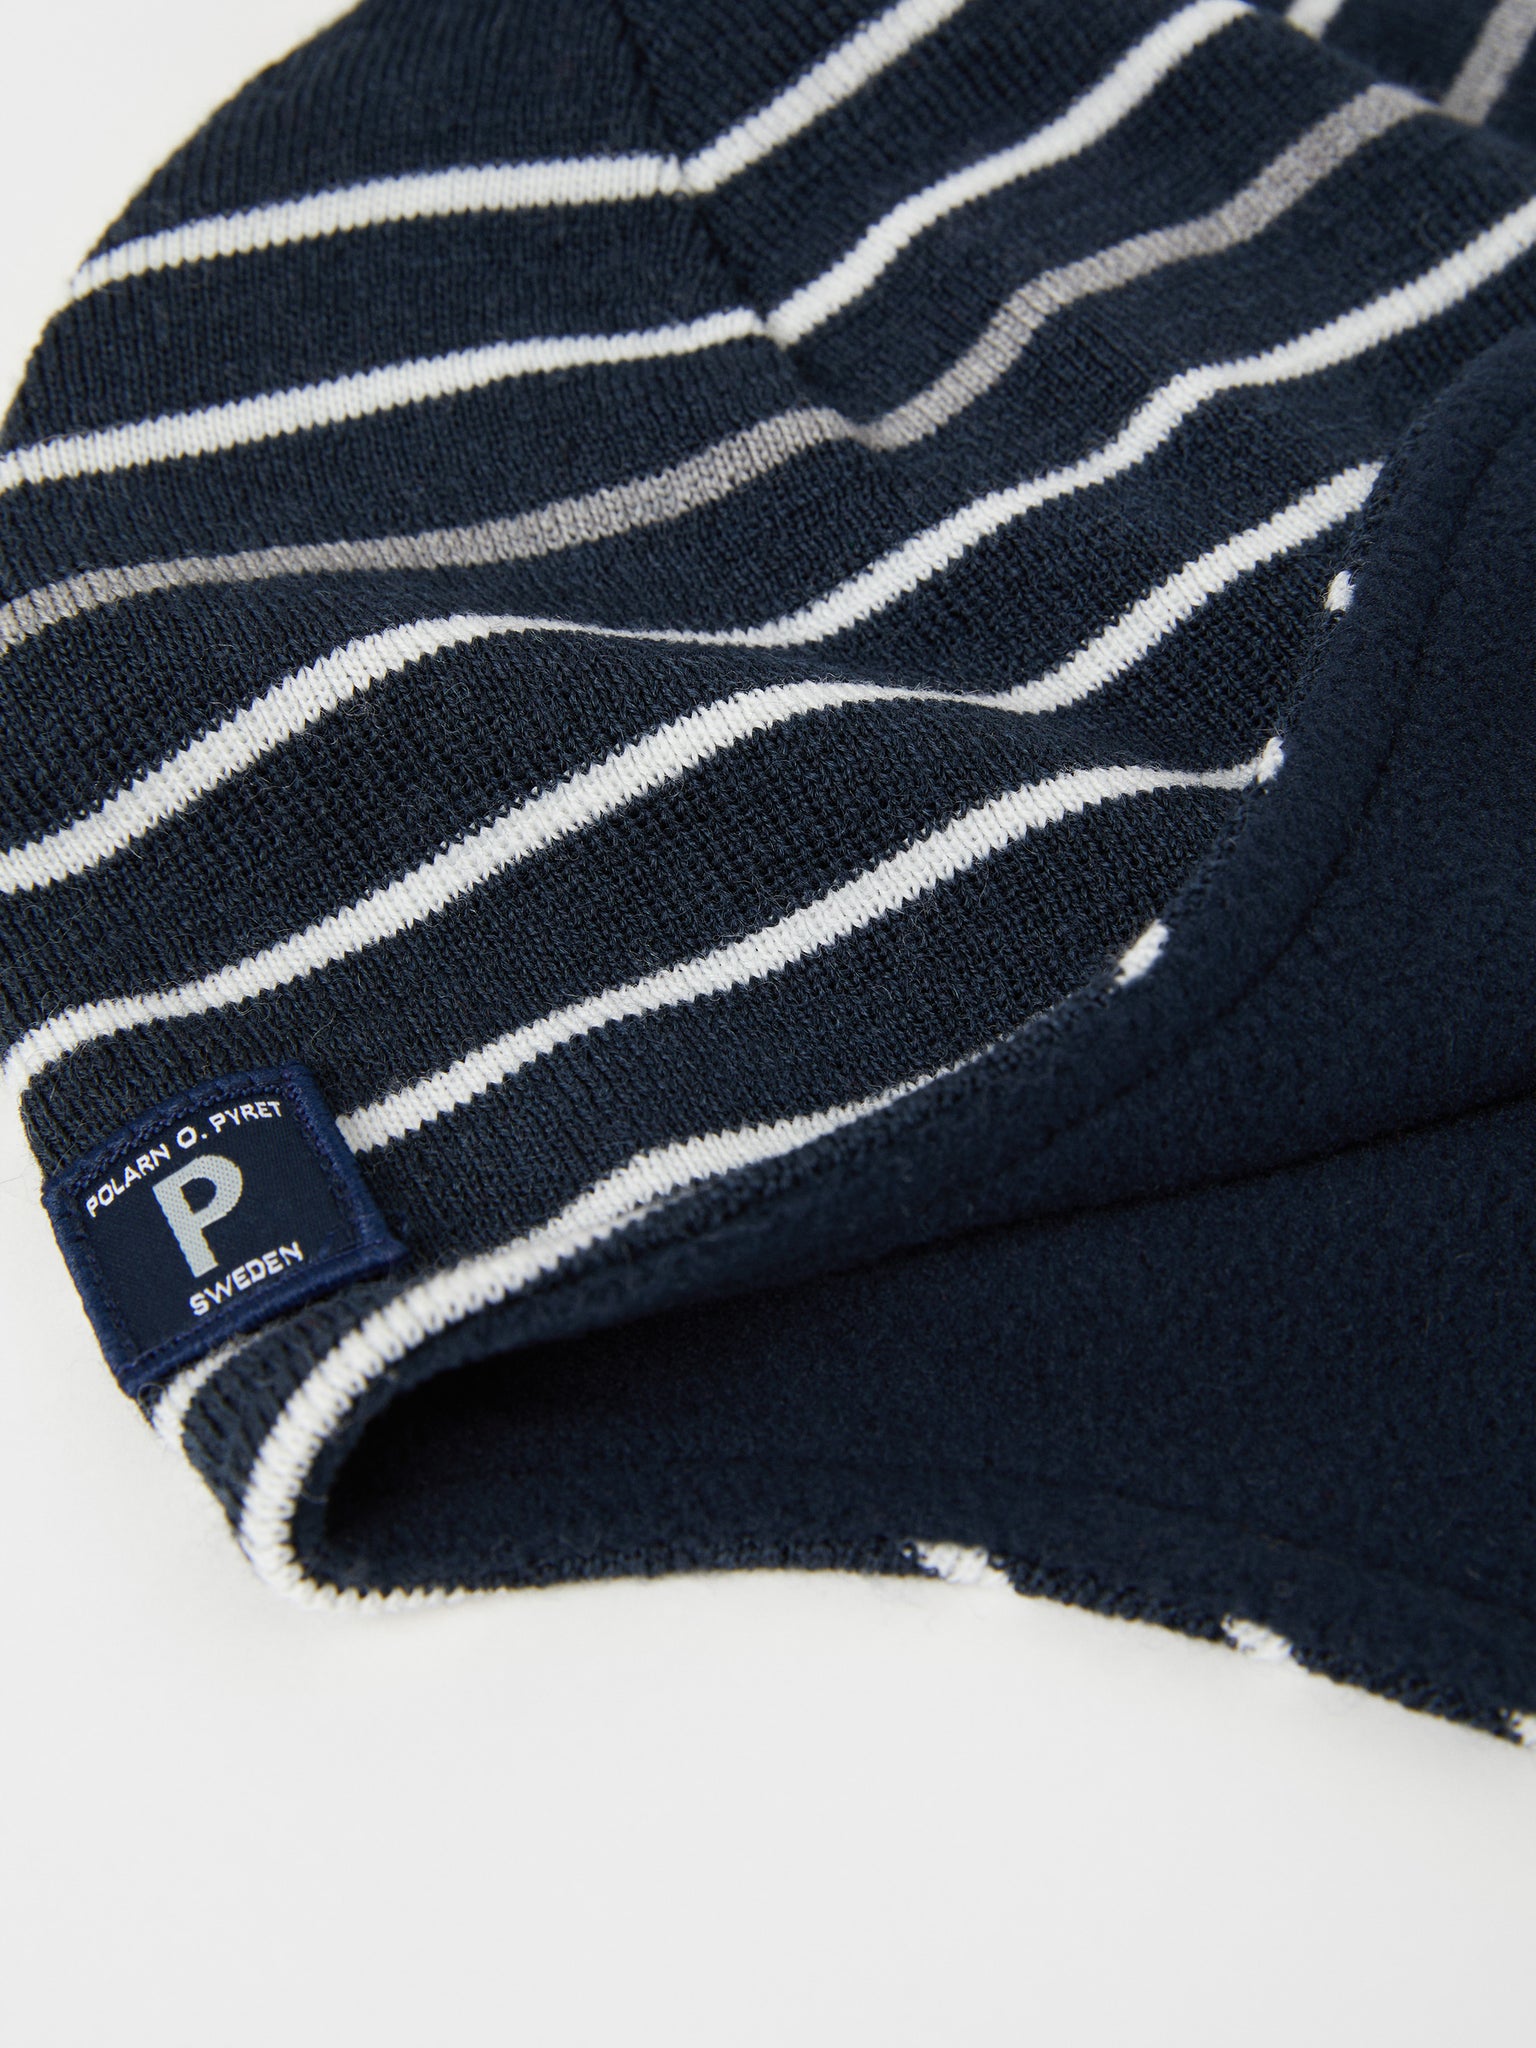 Merino Wool Navy Kids Bobble Hat from the Polarn O. Pyret outerwear collection. Ethically produced kids outerwear.